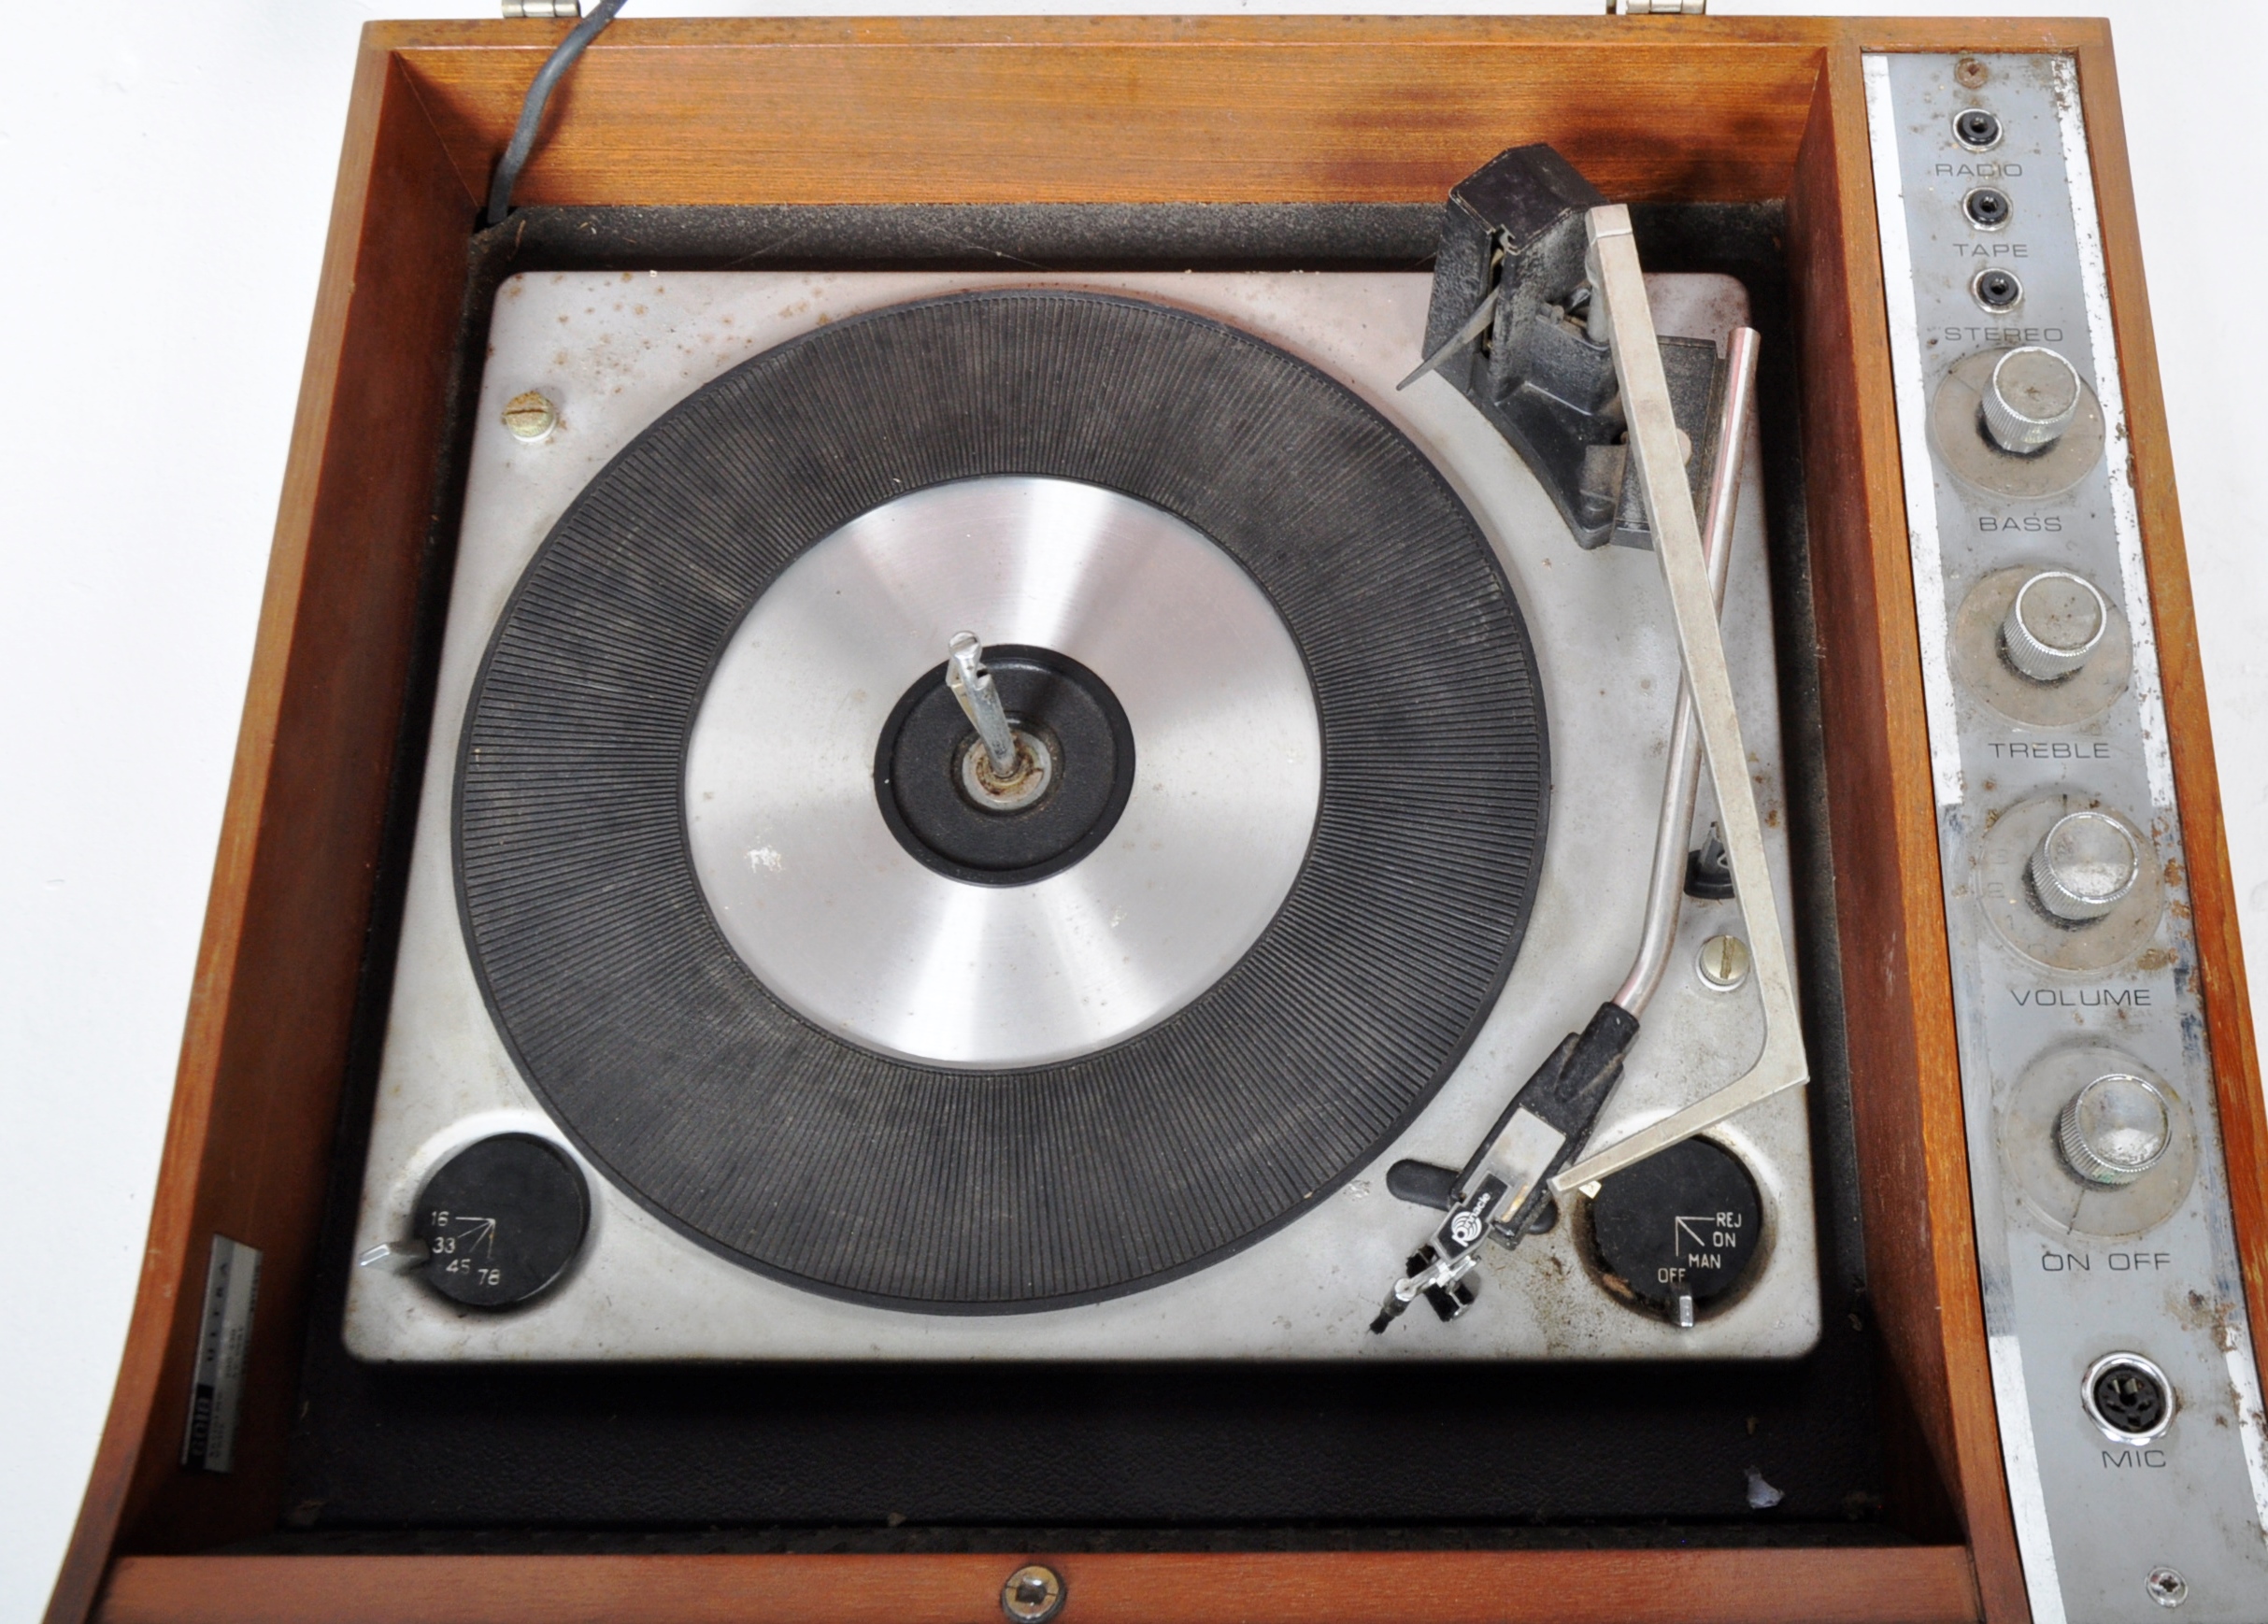 ULTRA - MODEL 6018 - TEAK CASED PORTABLE RECORD PLAYER - Image 4 of 4